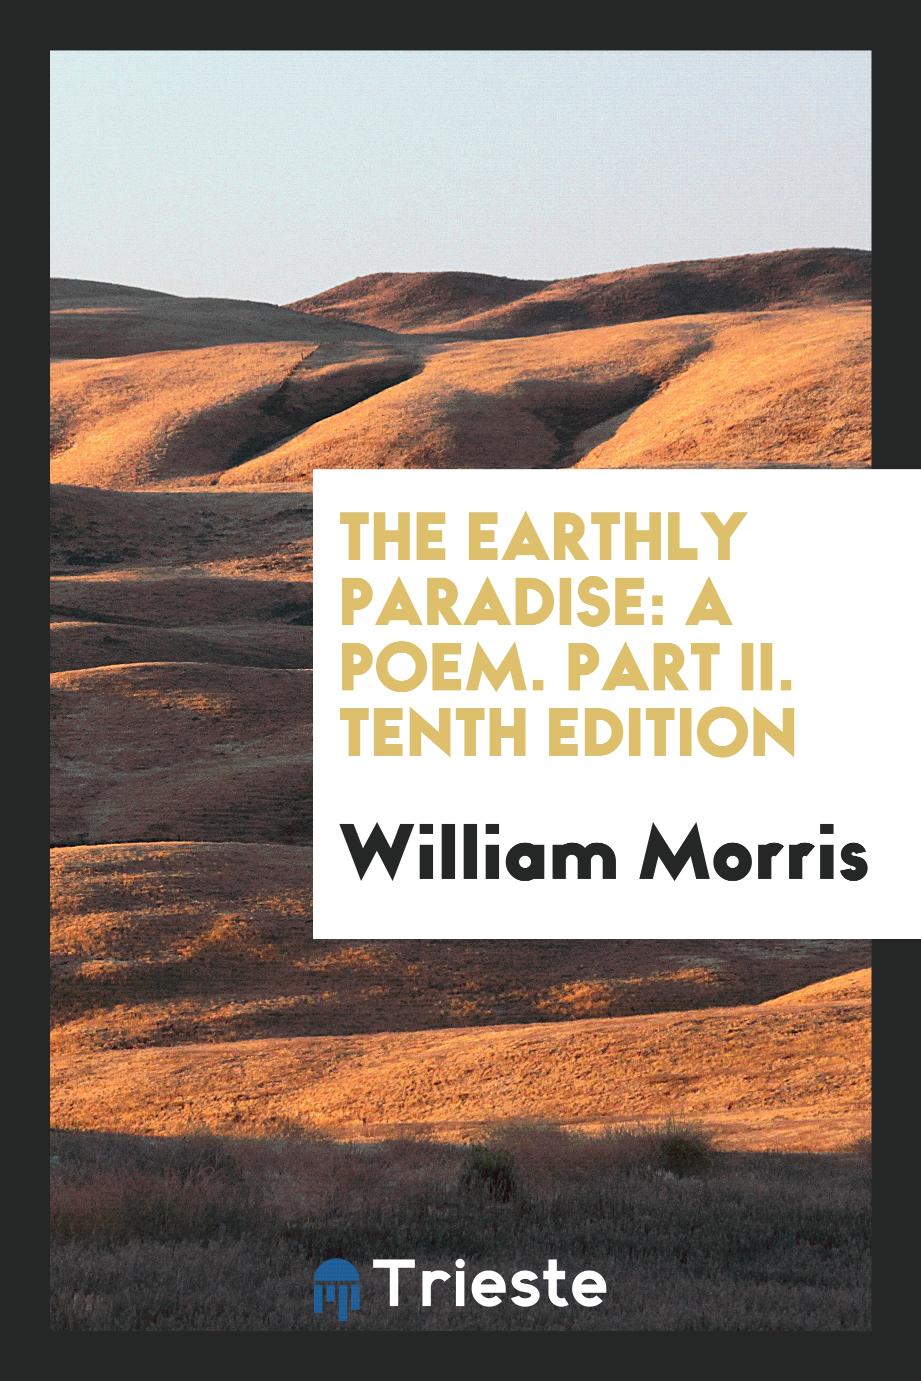 The Earthly Paradise: A Poem. Part II. Tenth Edition